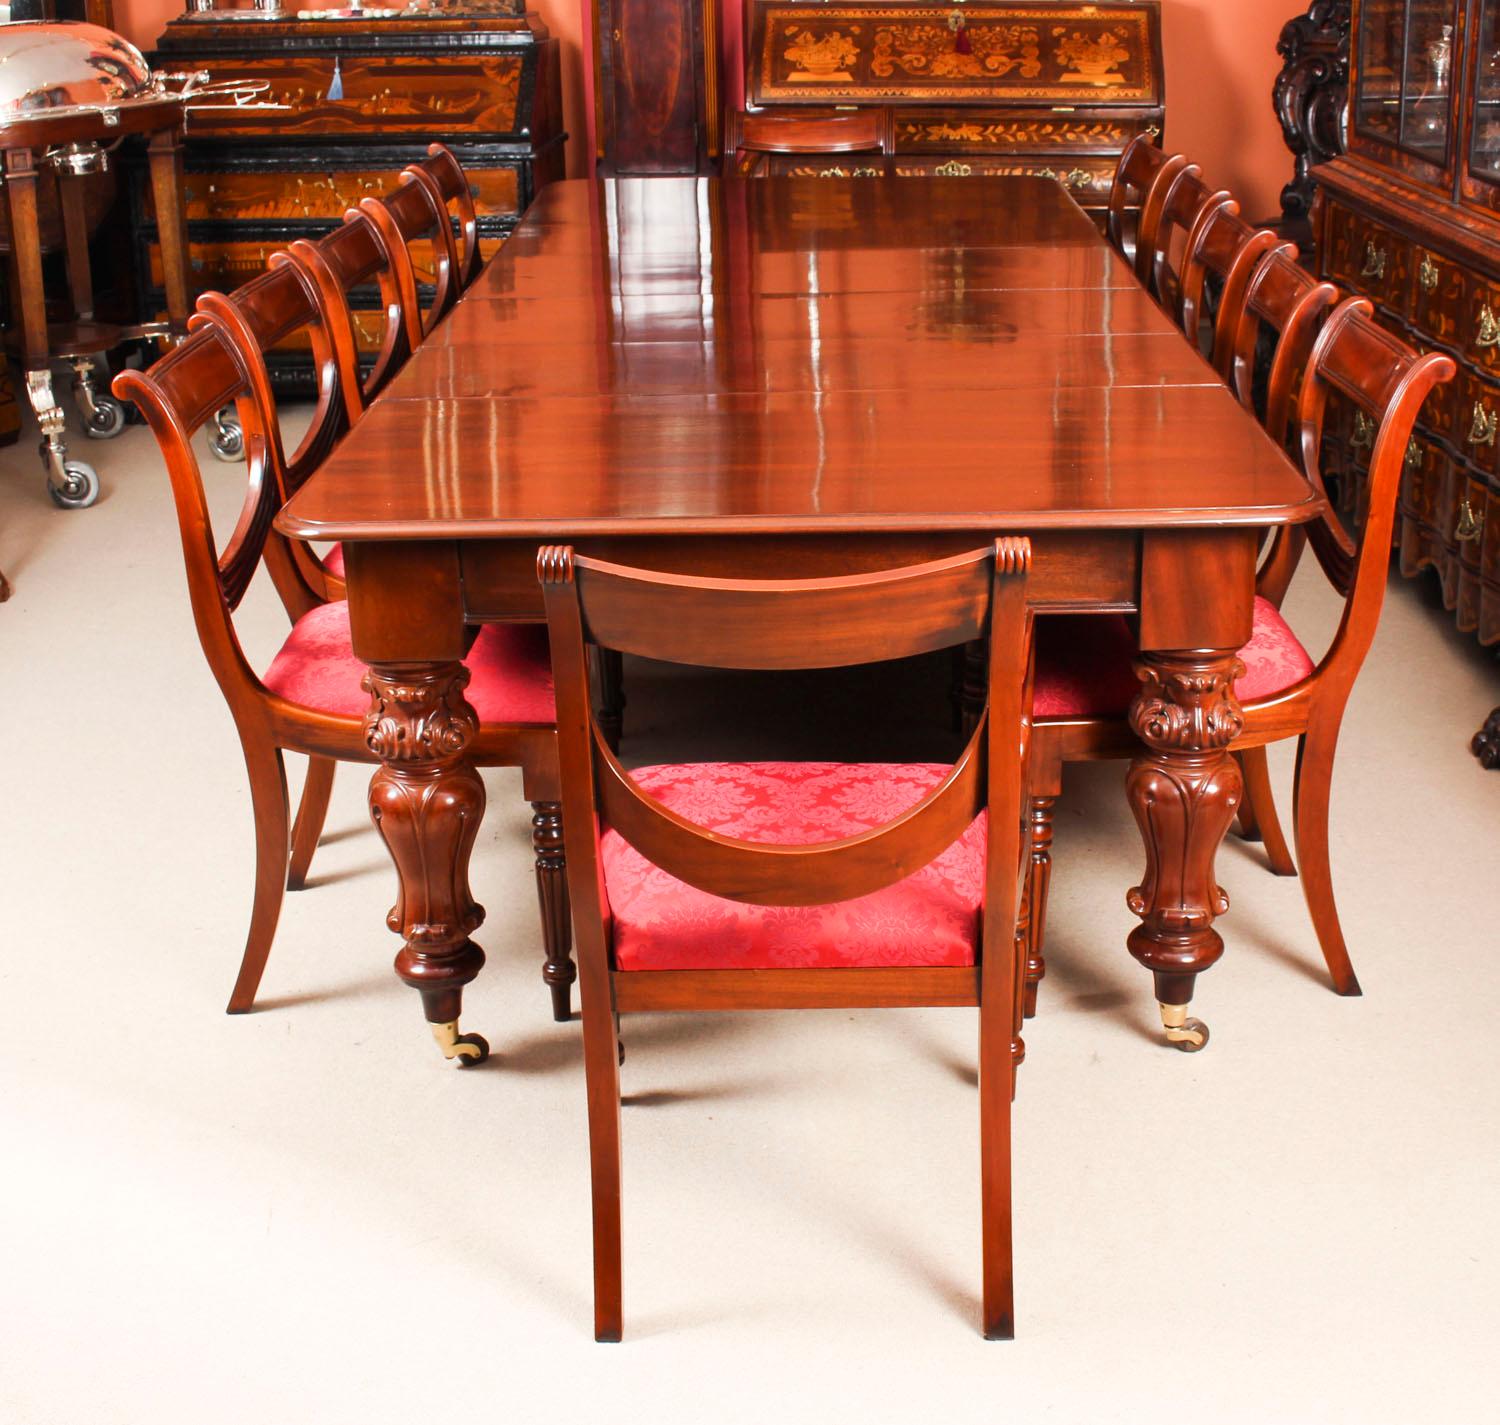 This is a fabulous dining set comprising of an antique William IV solid mahogany pullout dining table, circa 1835 in date, with a set of twelve vintage swag back dining chairs.

This beautiful table is in stunning flame mahogany, the pull out